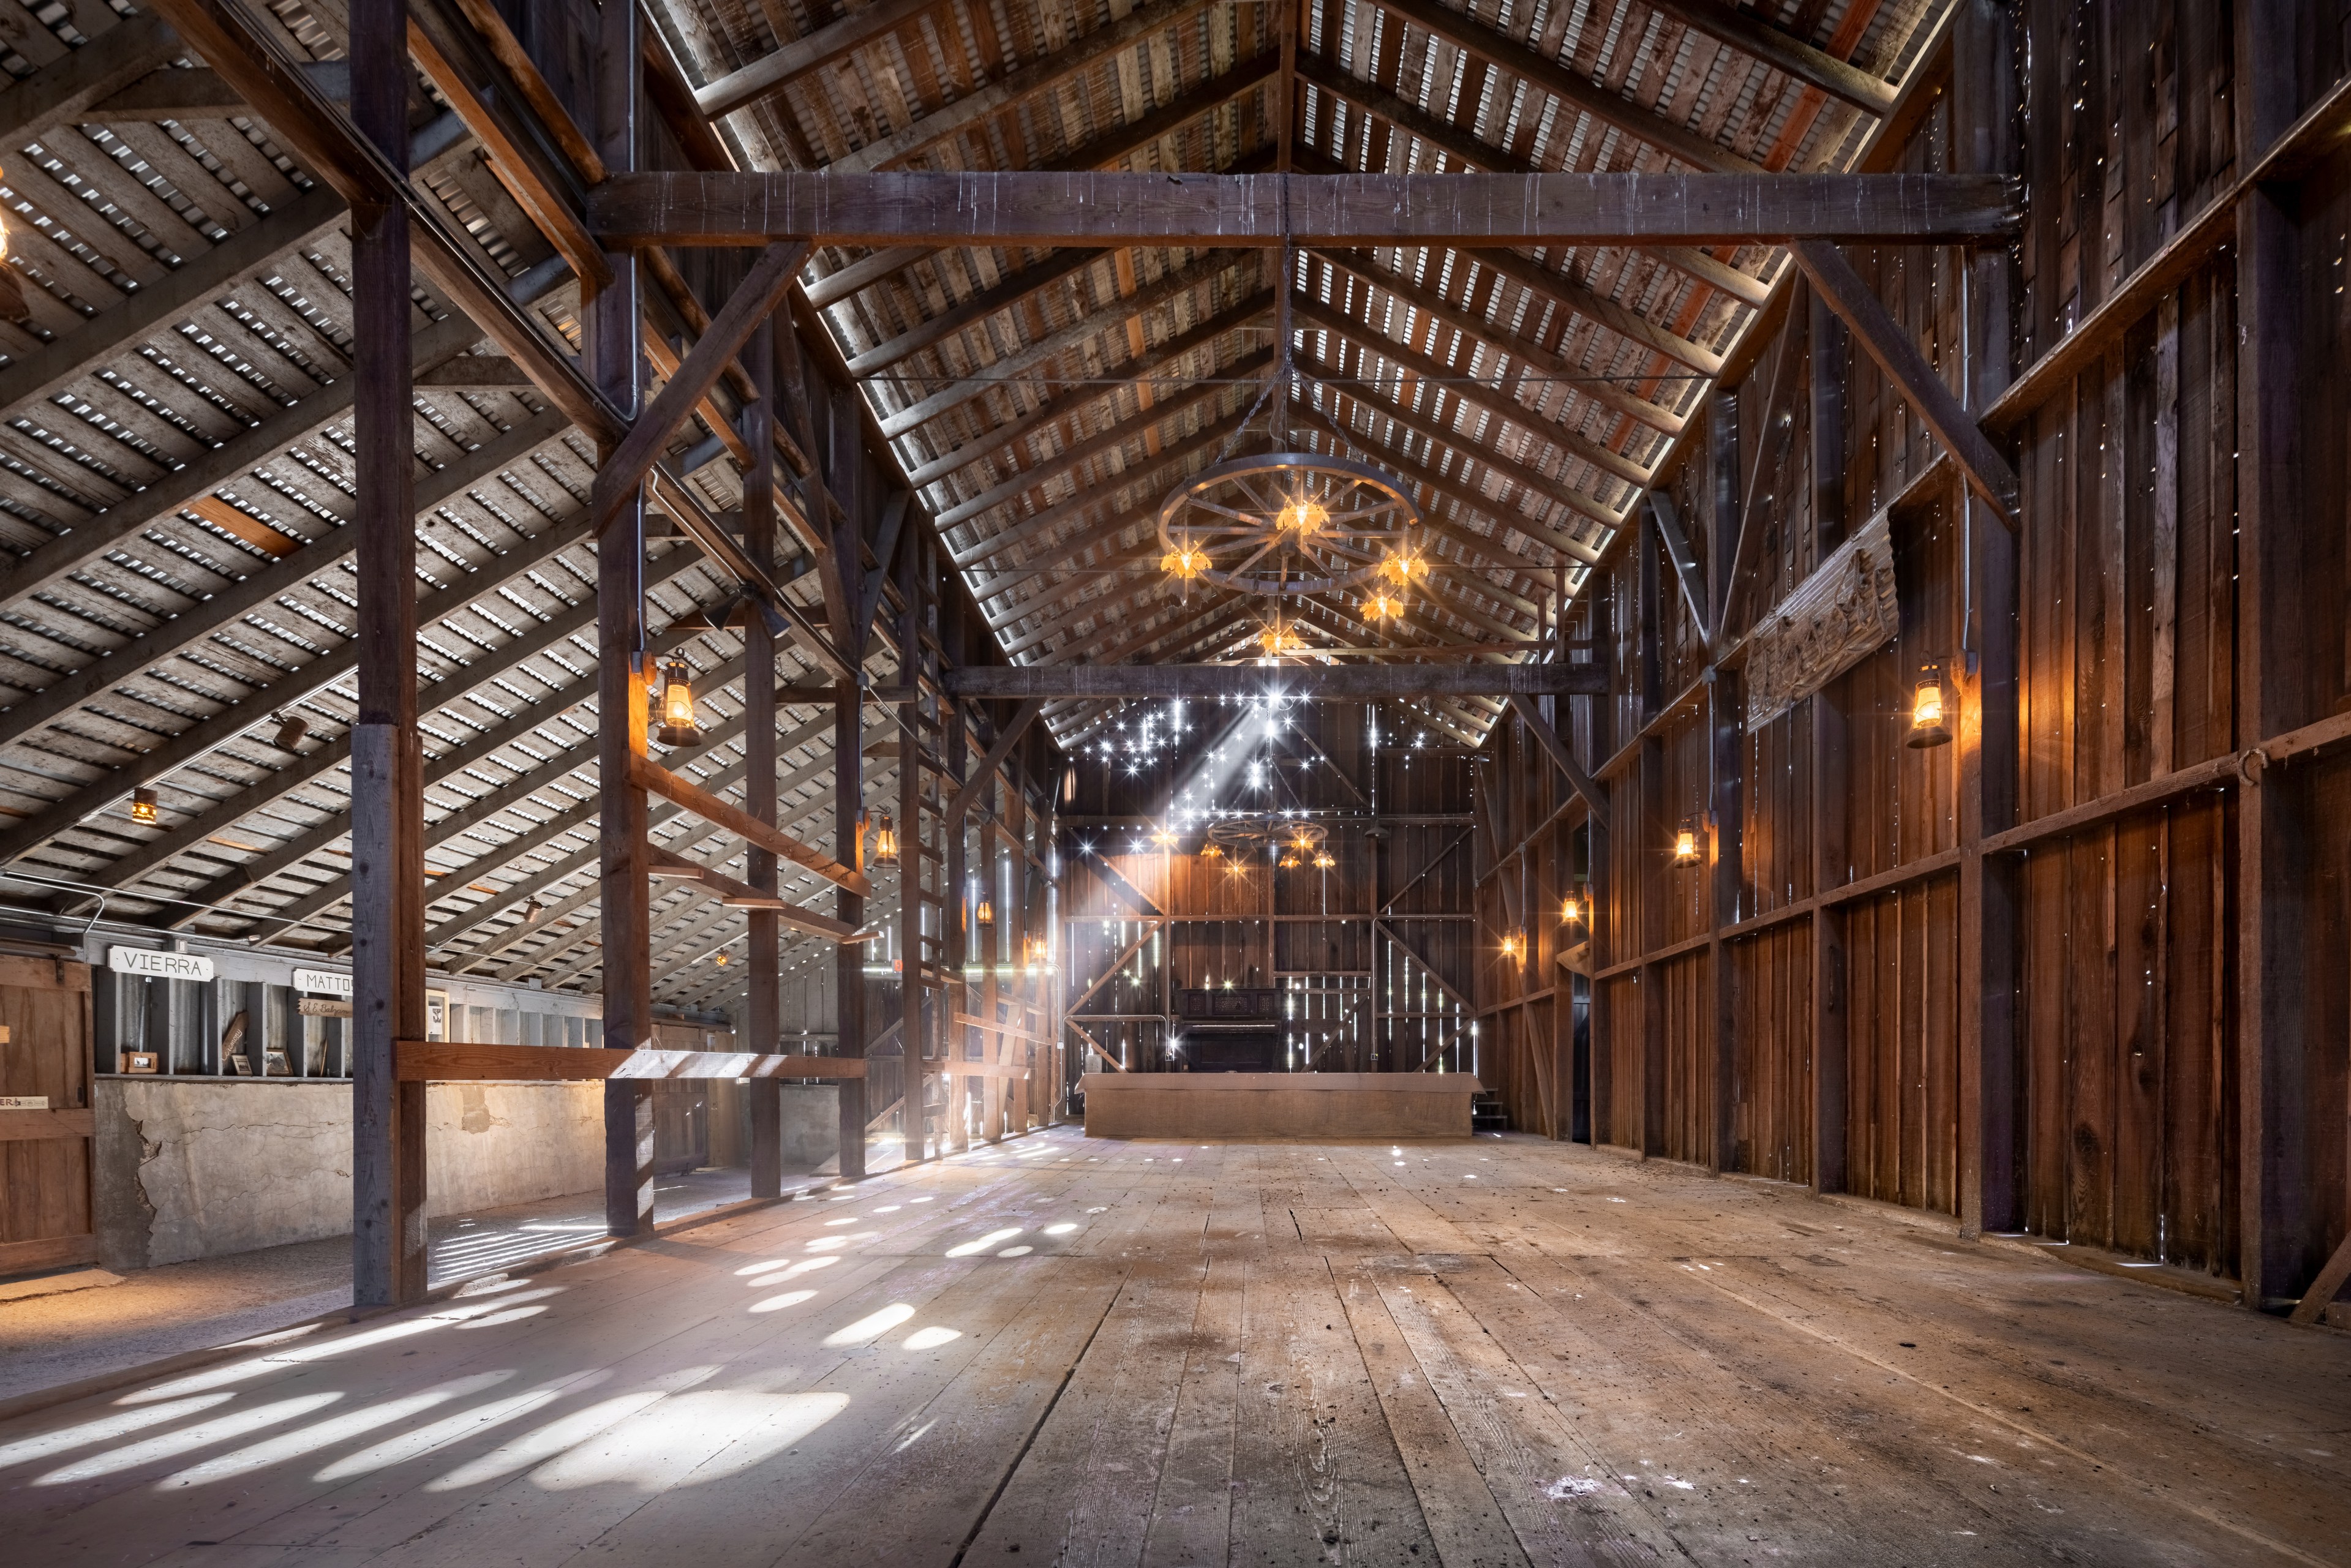 Inside an empty rustic barn with wooden beams, hanging lights, and sunbeams filtering through the walls.